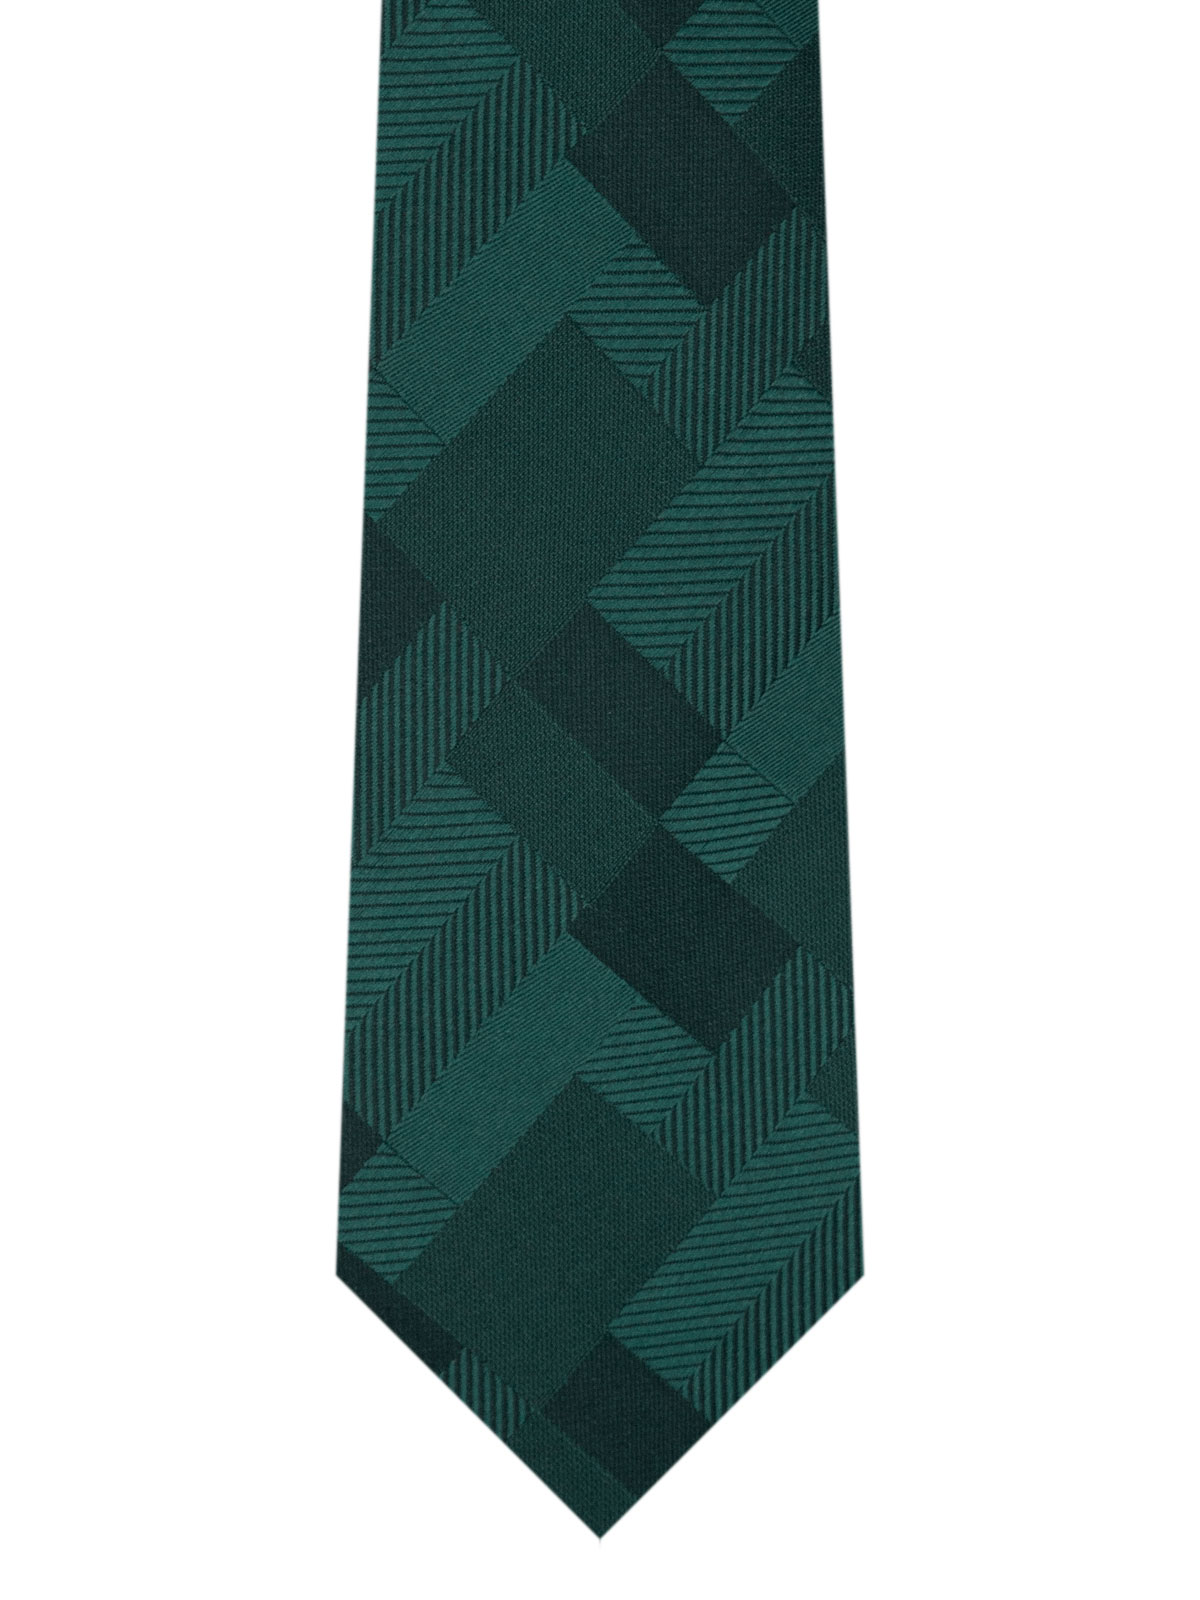 Green patterned tie - 10188 - € 14.06 img2